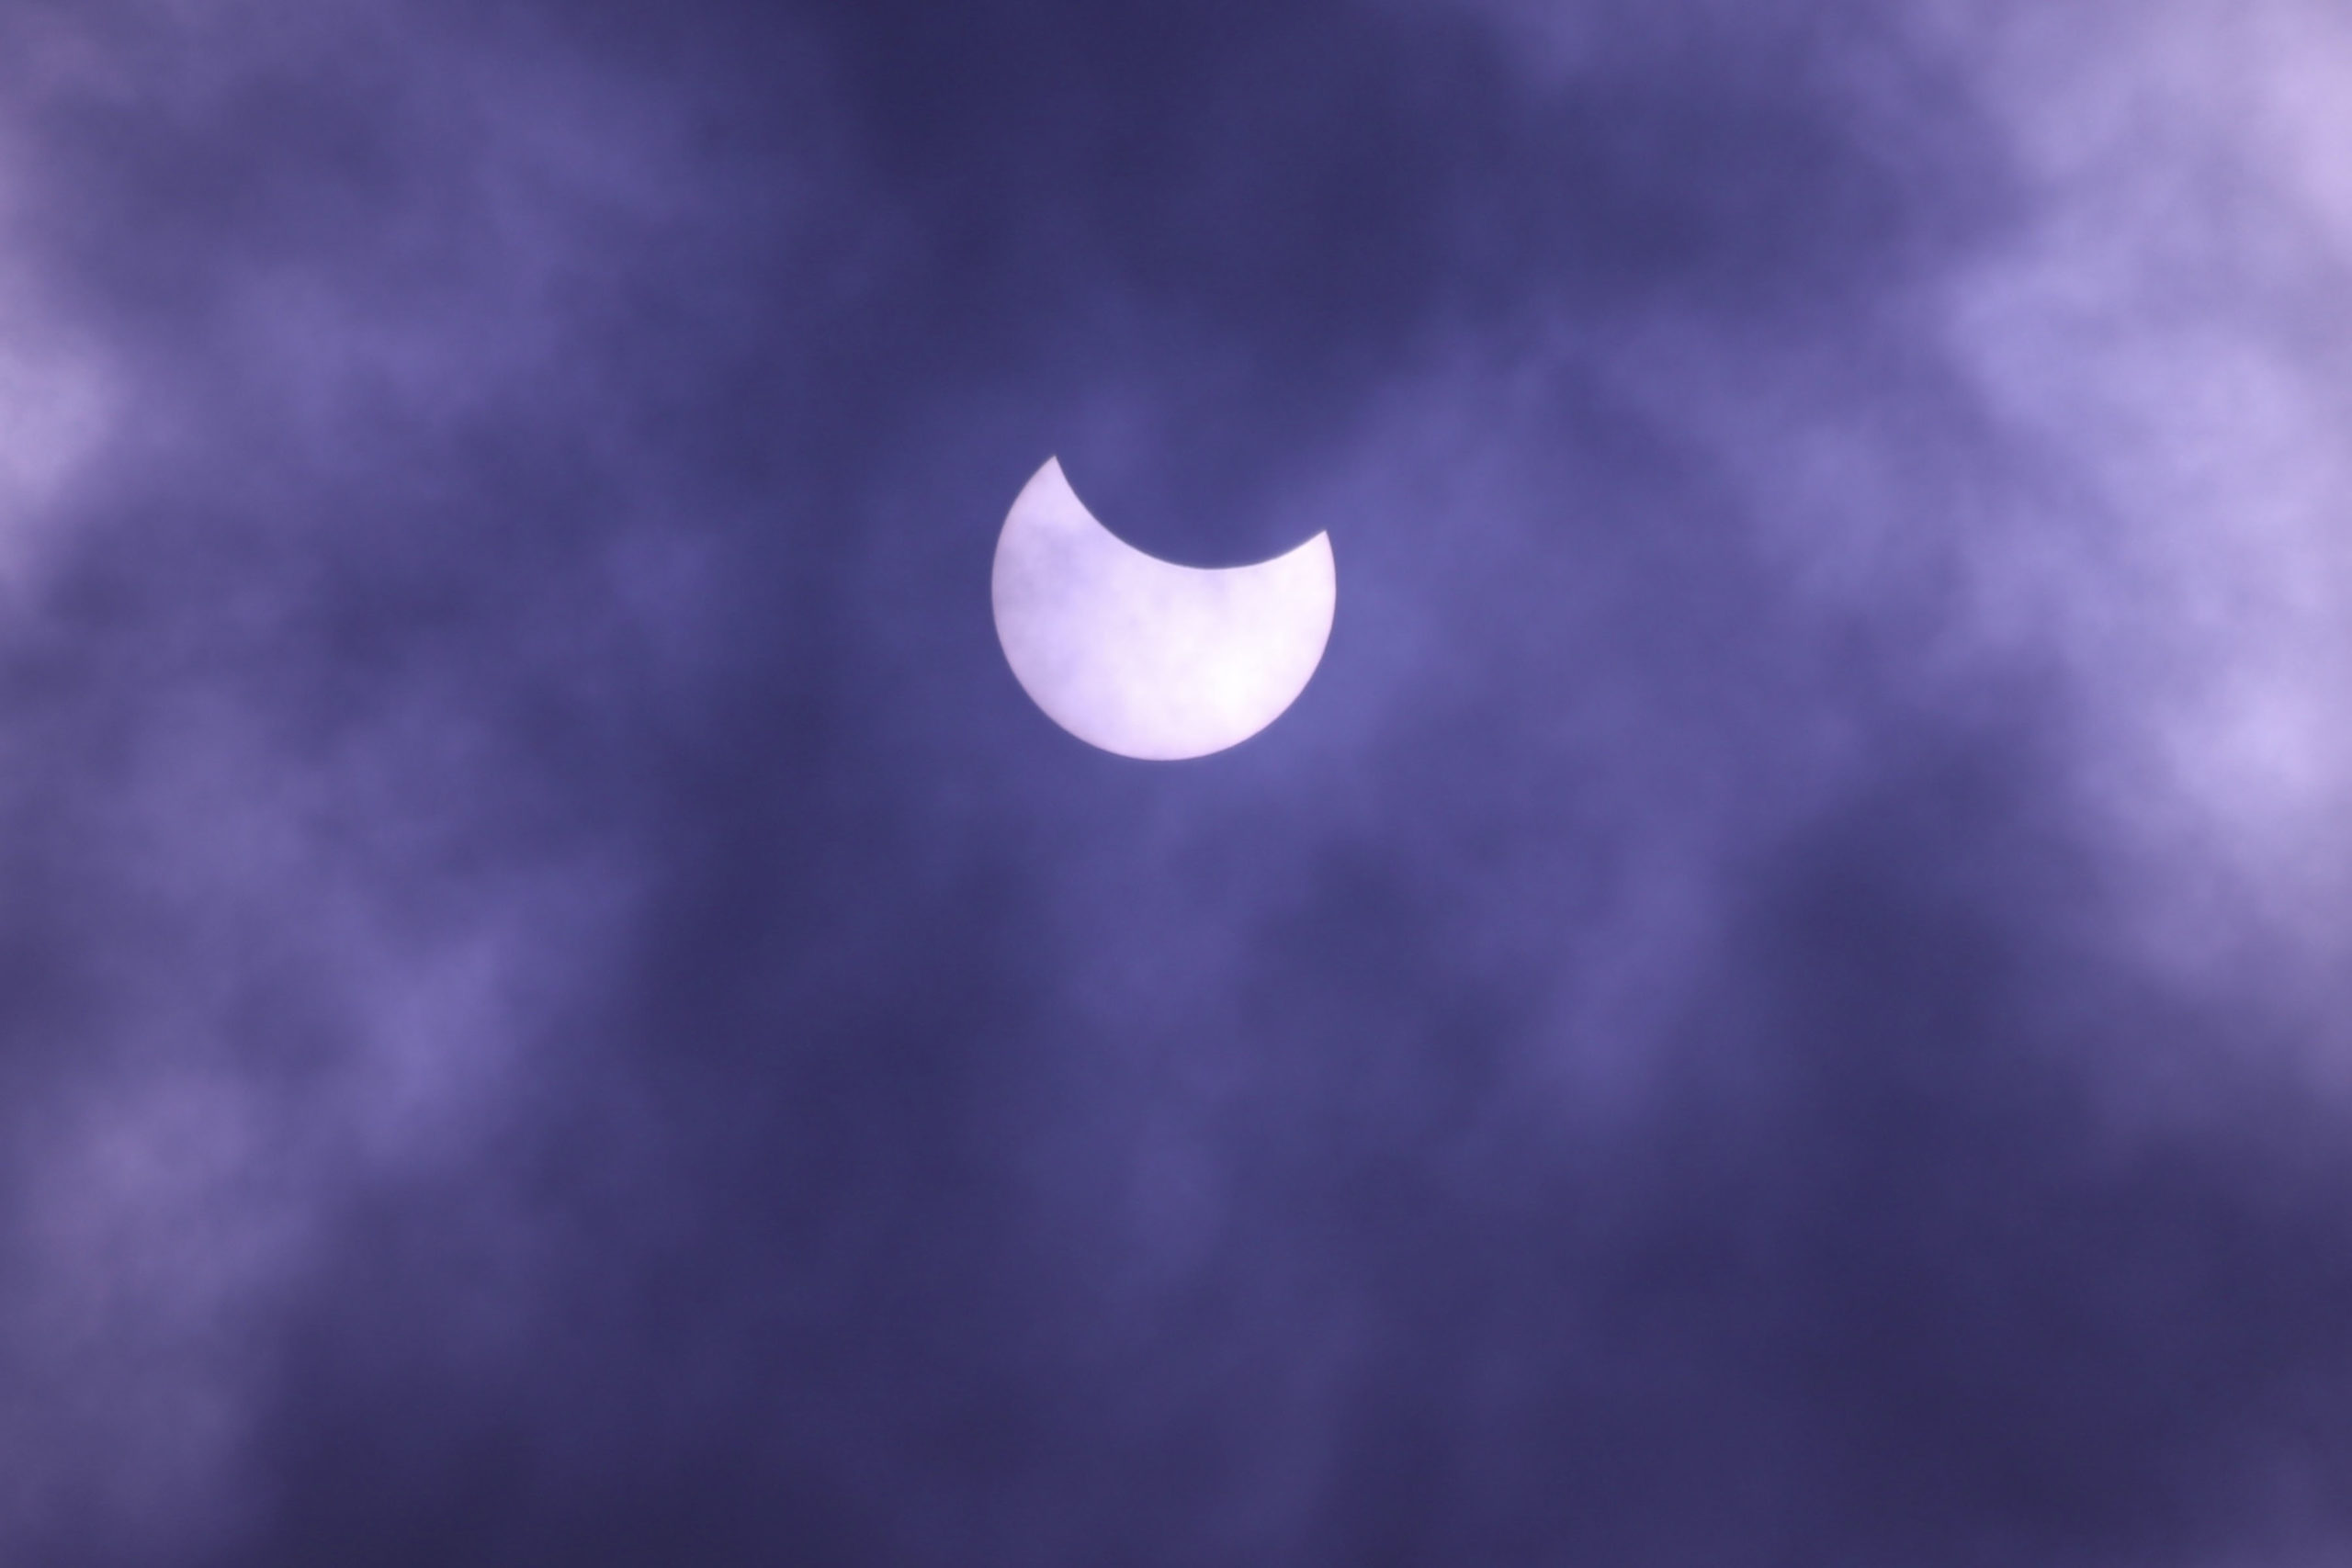 Nepal witnesses partial solar eclipse (in pics)